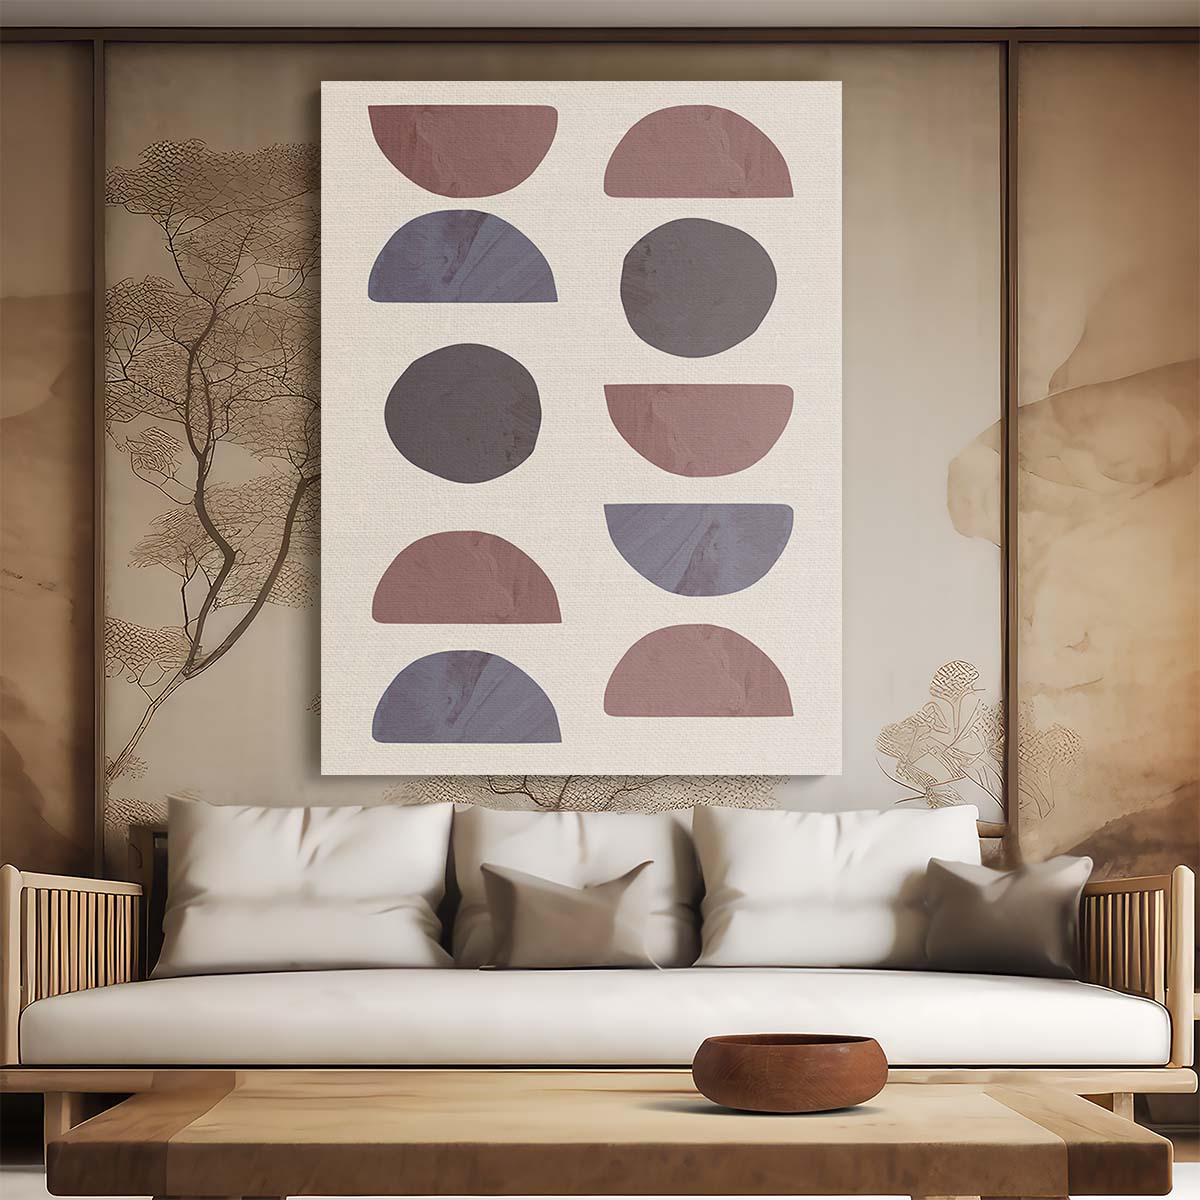 Geometric Abstract Beige Illustration - Graphic Shapes Collage Wall Art by Luxuriance Designs, made in USA